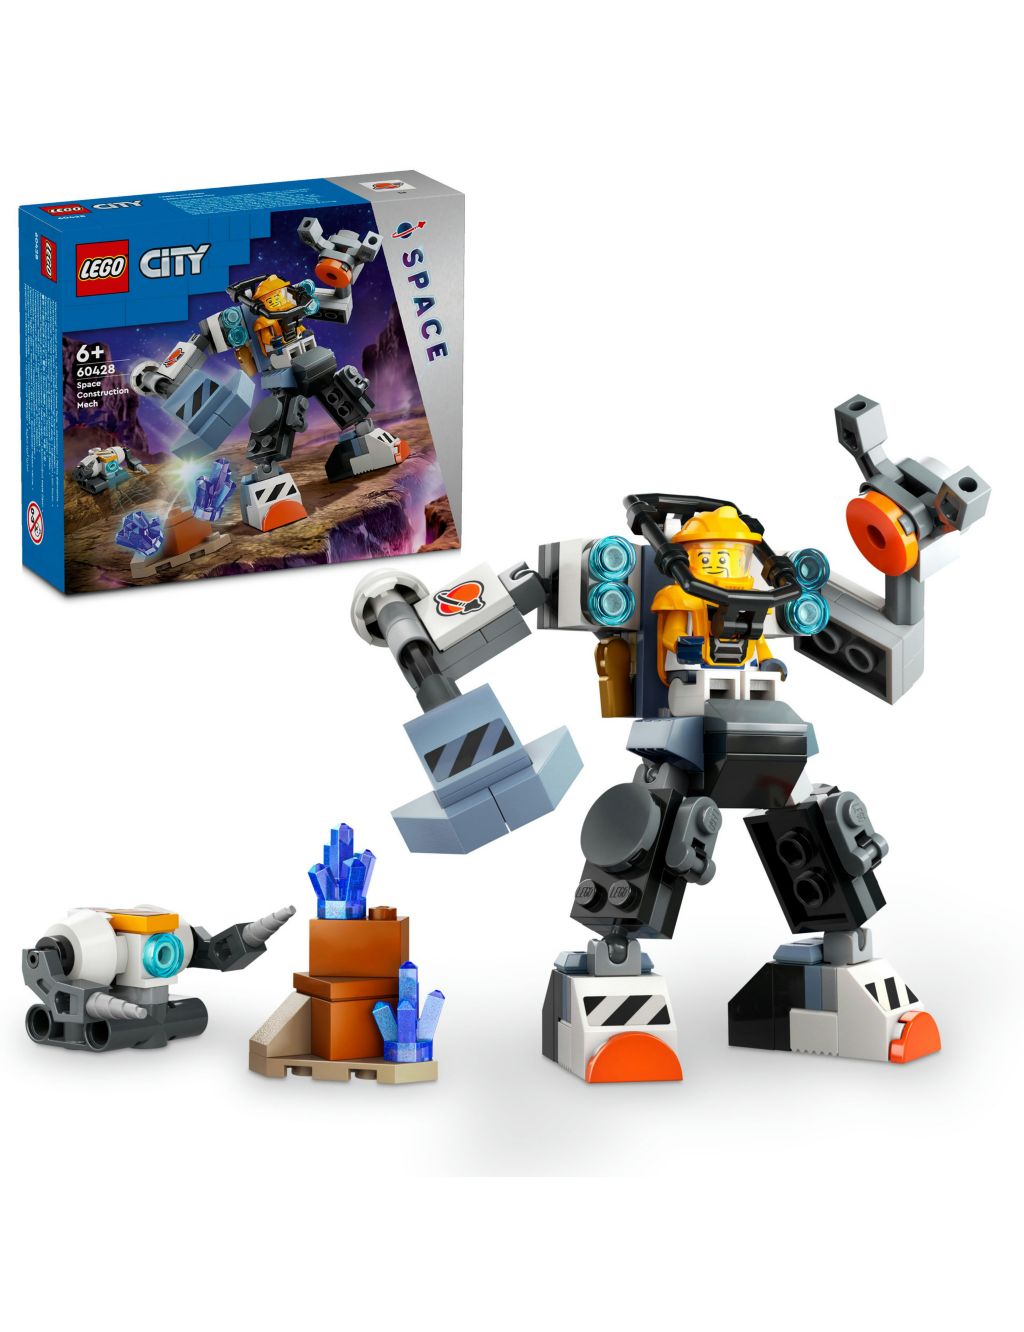 LEGO® City Space Construction Mech Suit Toy 60428 (6+ Yrs)